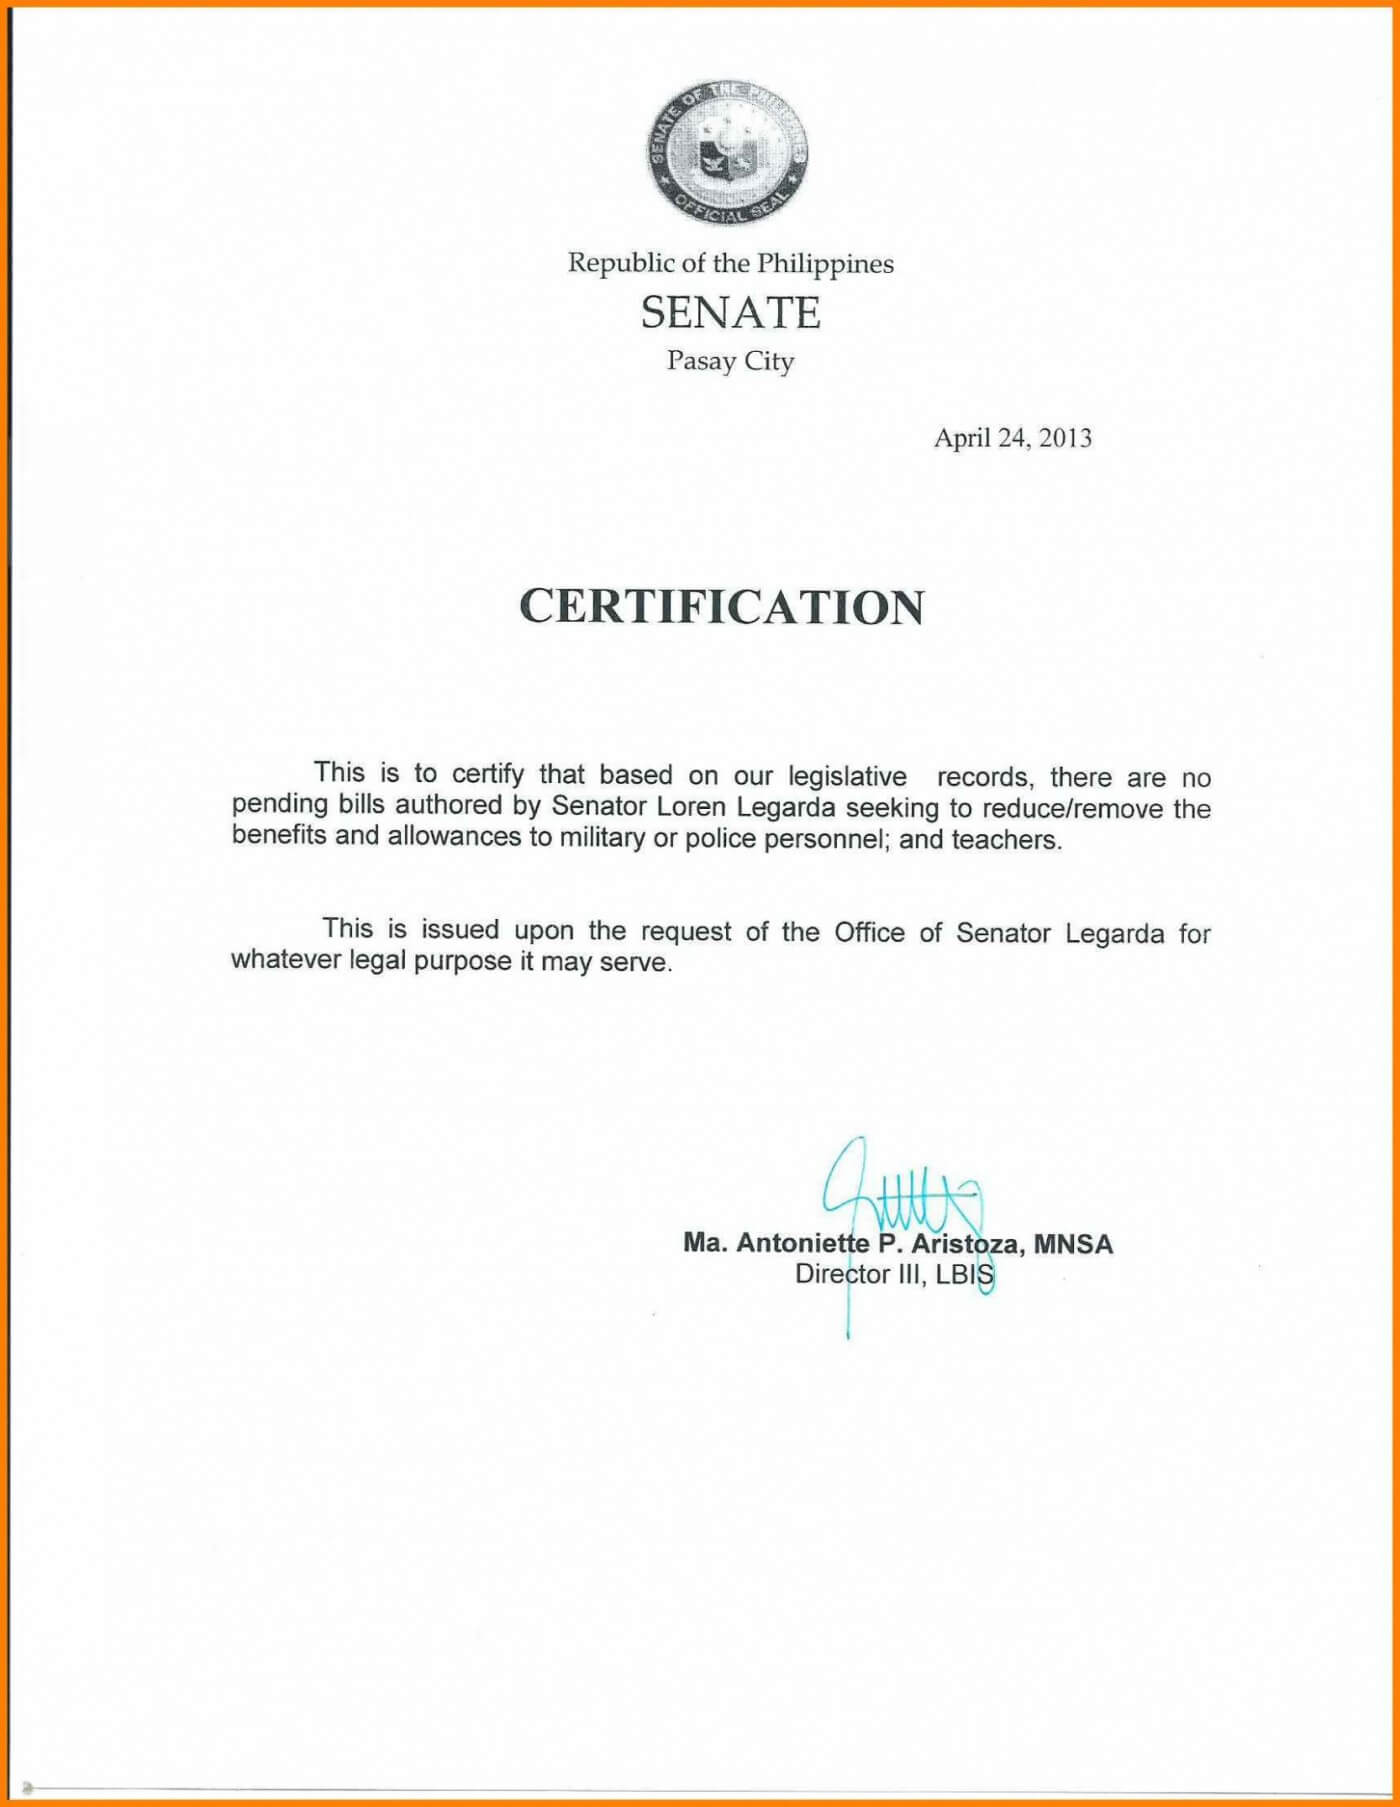 016 Sample Certificate Of Employment Certificates Stunning With Regard To Template Of Certificate Of Employment